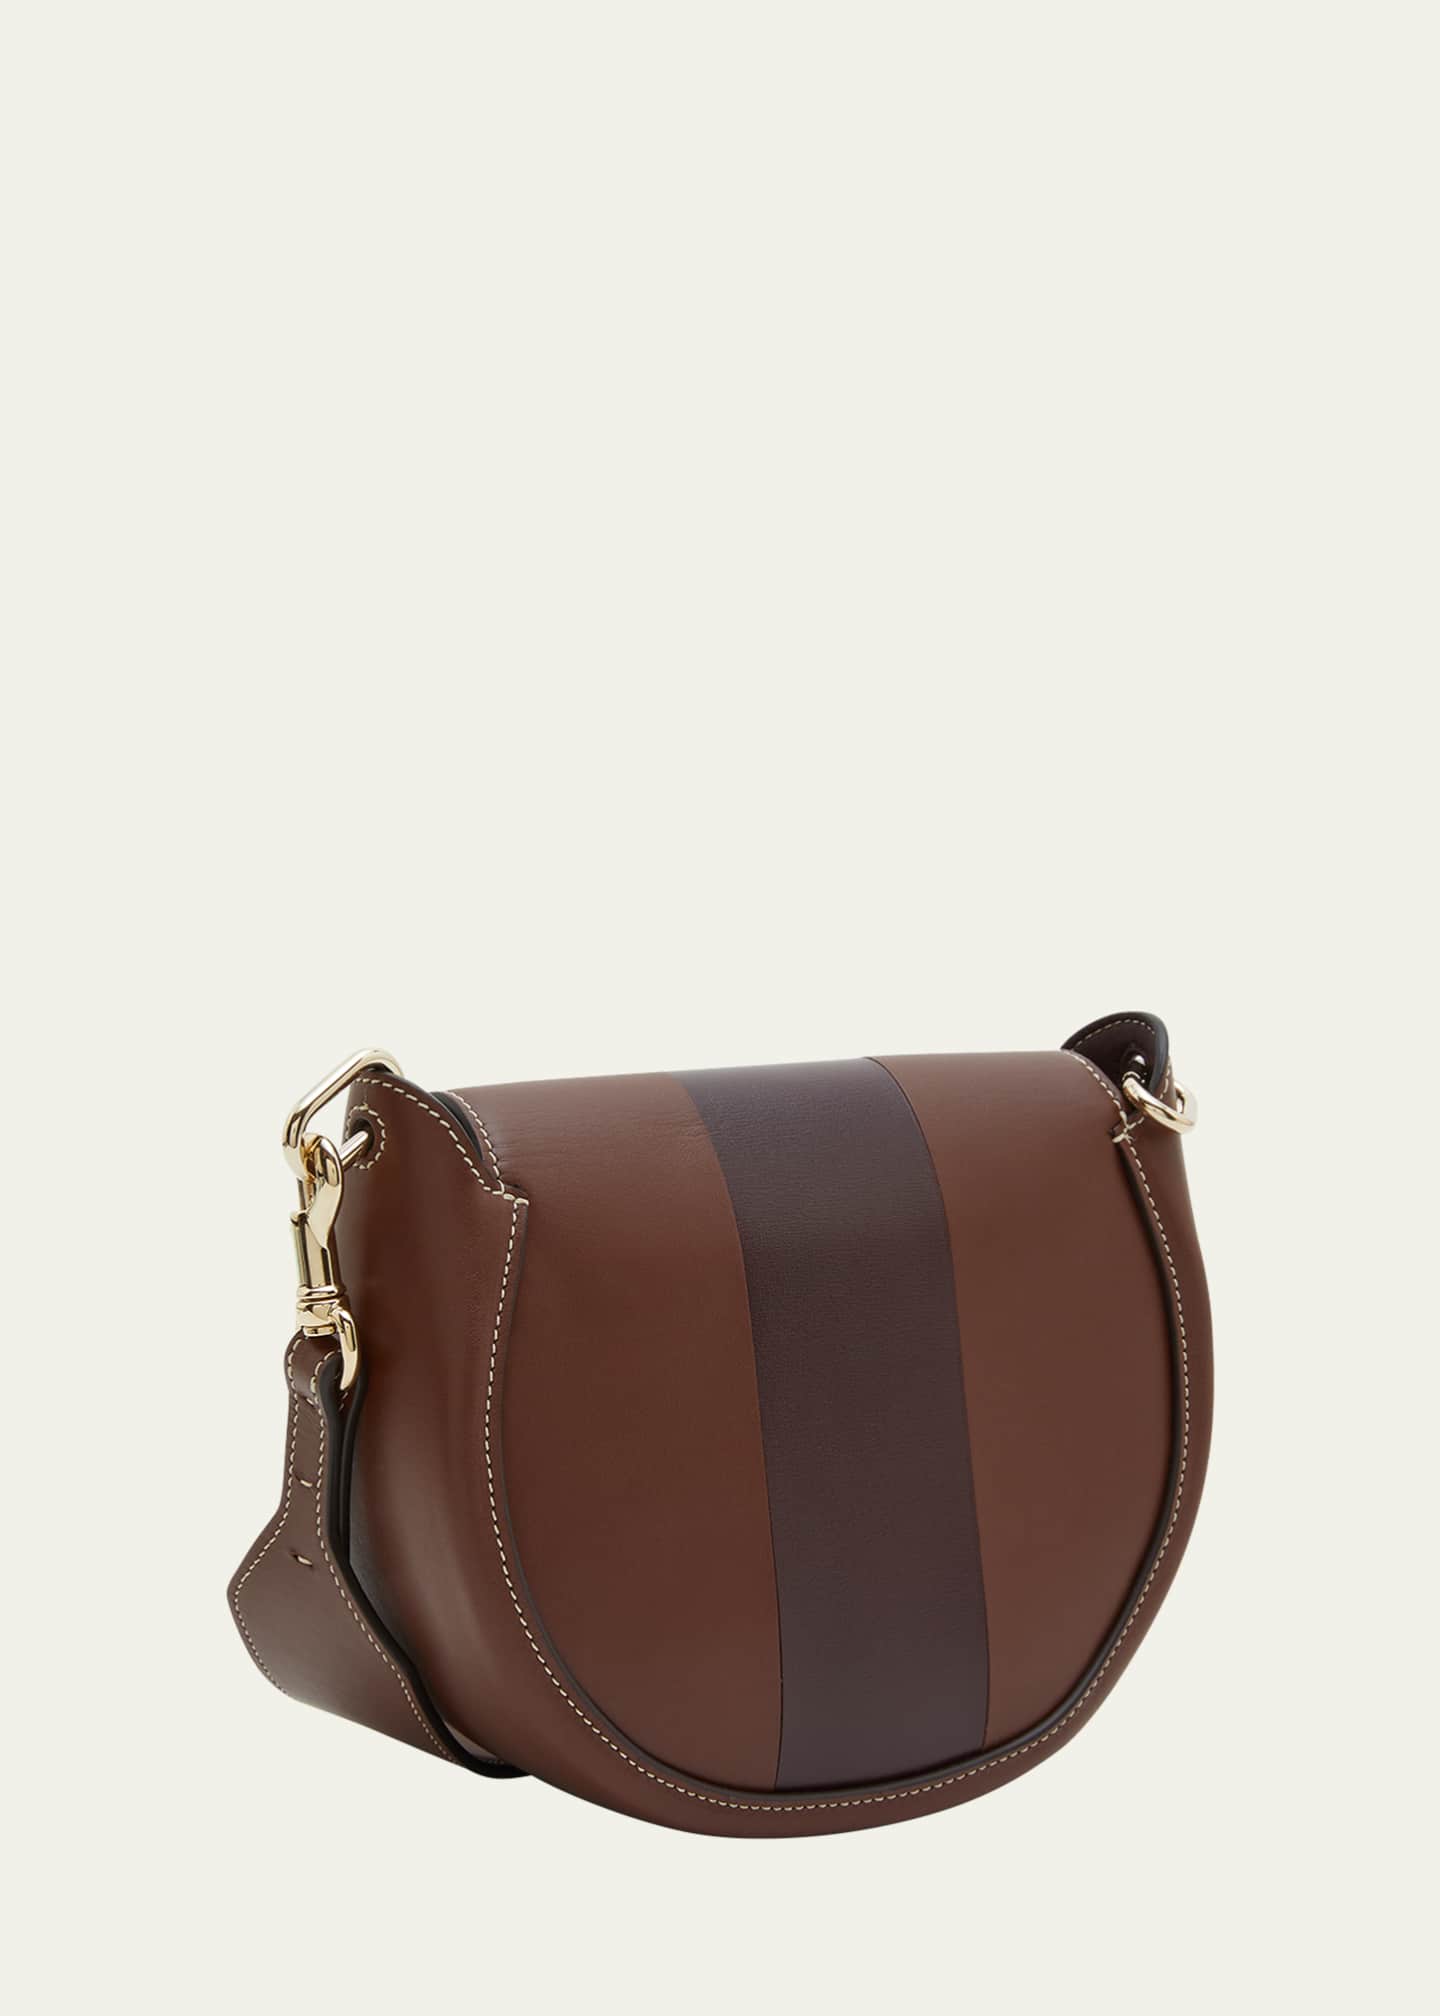 Designer Shiny Leather Suede Cloe Leather Crossbody Bag With Magnet Closure  Round Shape Crossbody Handbag For Women With Linen Lining And Flap Clasp  From Yunxiang001, $164.04